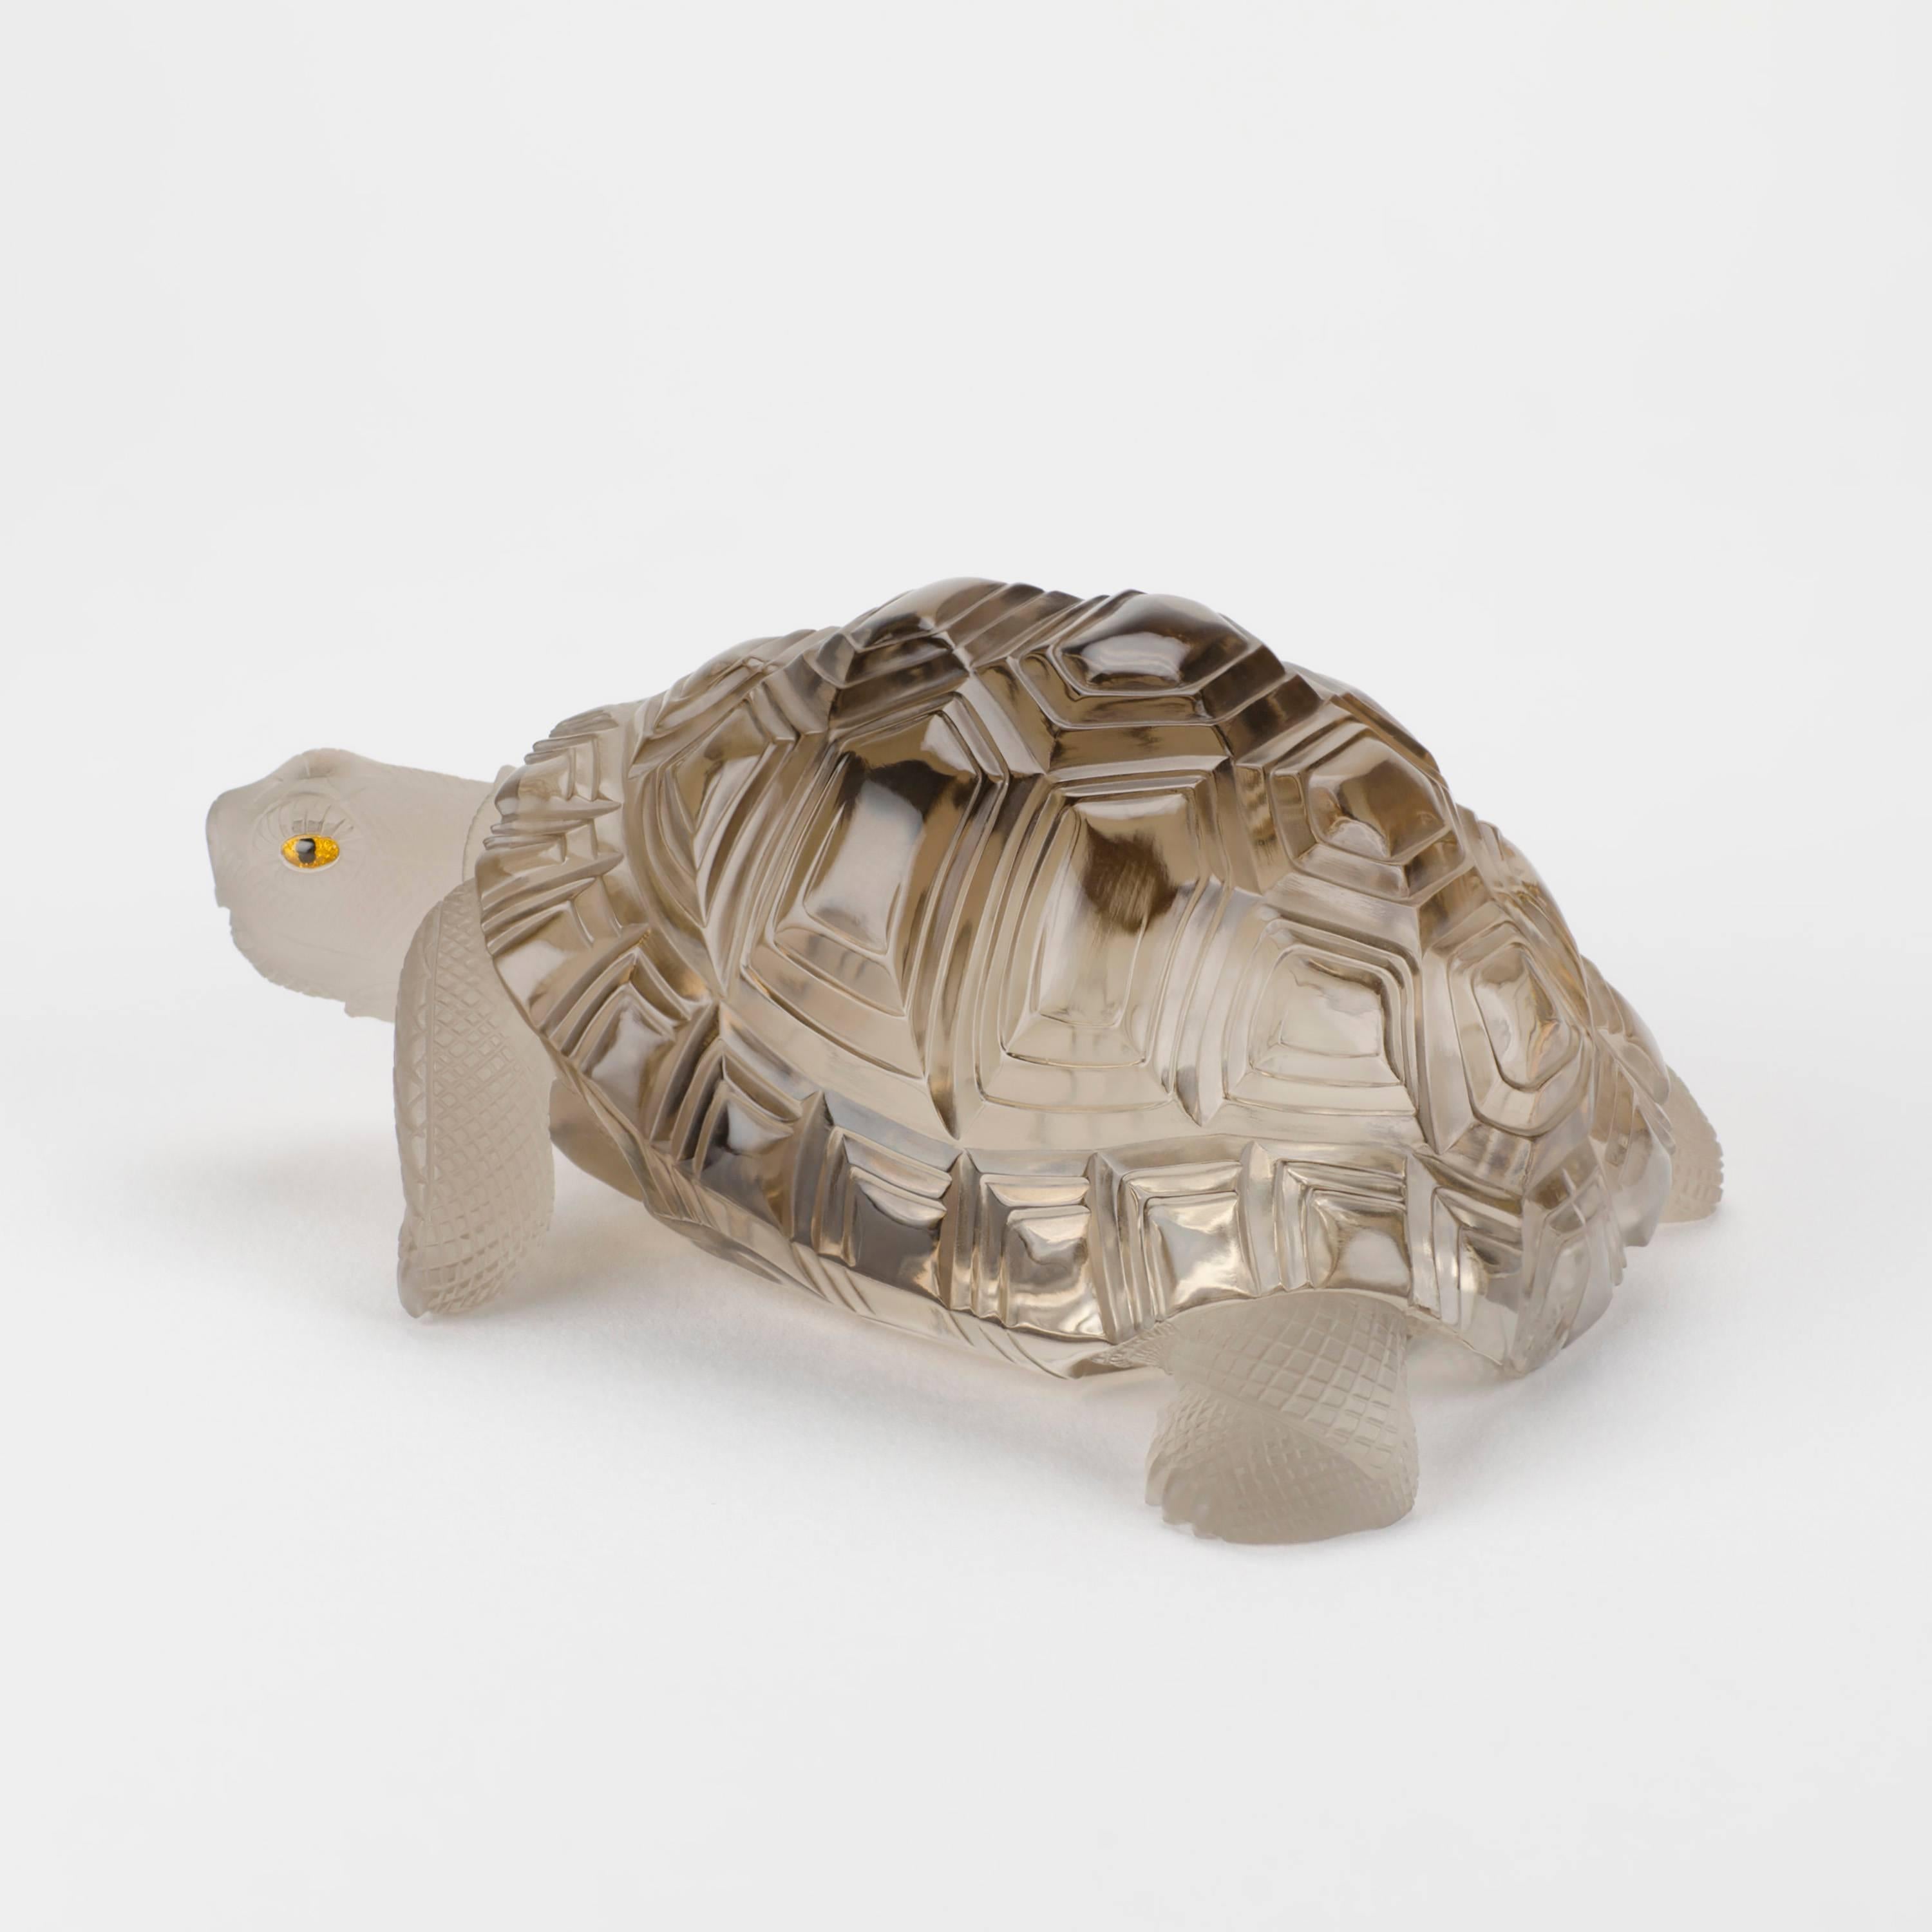 Turtles have always been immensely popular as charms and talismans and our beautifully rendered smoky quartz sculpture is a perfect candidate for the discerning collector.
Although it is unsigned it is an authentic Henn piece, carved in